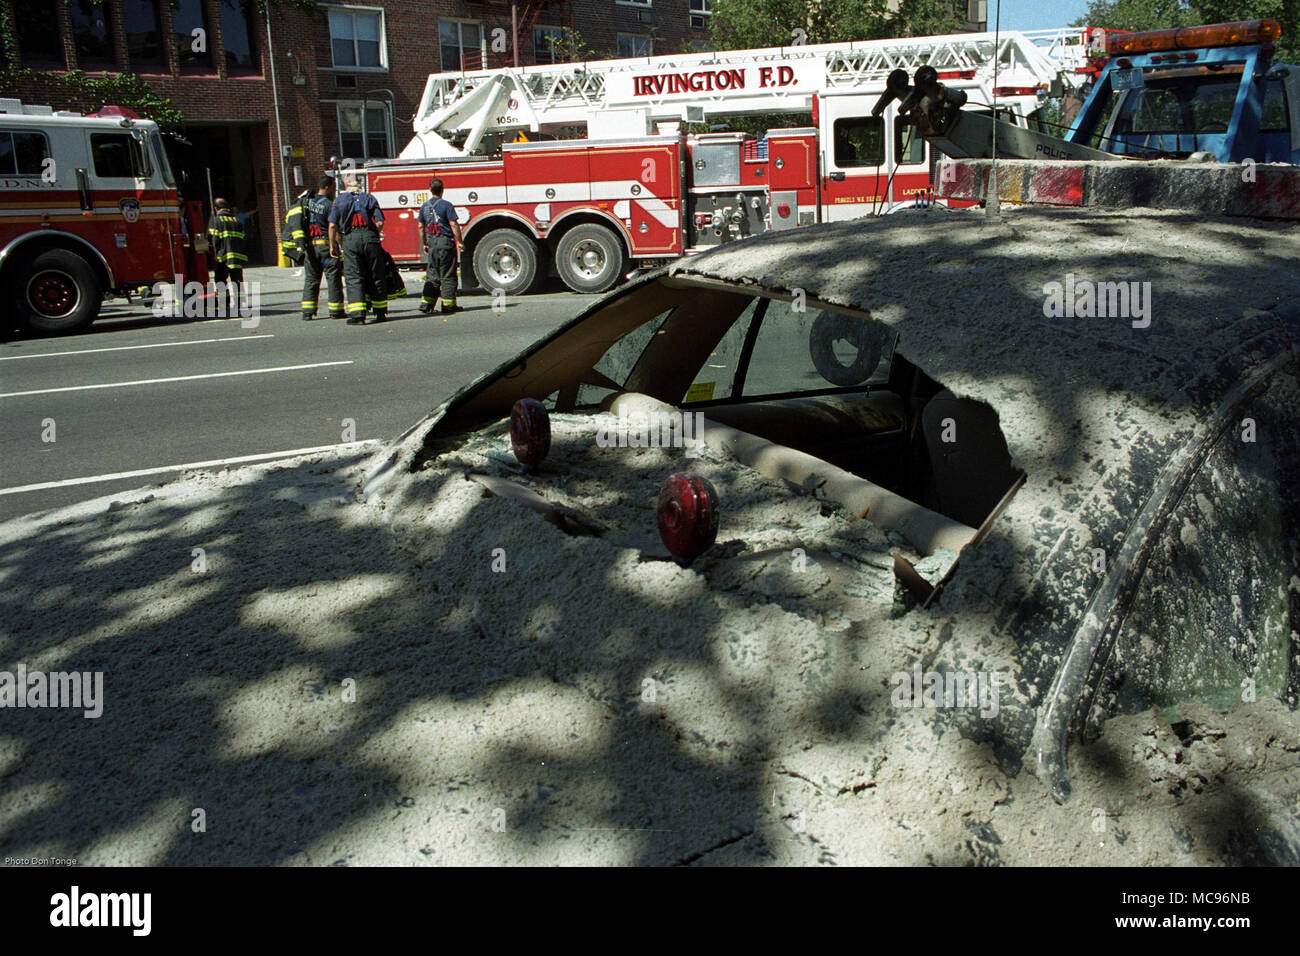 Abandoned damaged police car and The Irvington Fire Department NYC on duty at the terrorist attack on The World Trade Center New York City on 9/11   photo DON TONGE Photographer Stock Photo